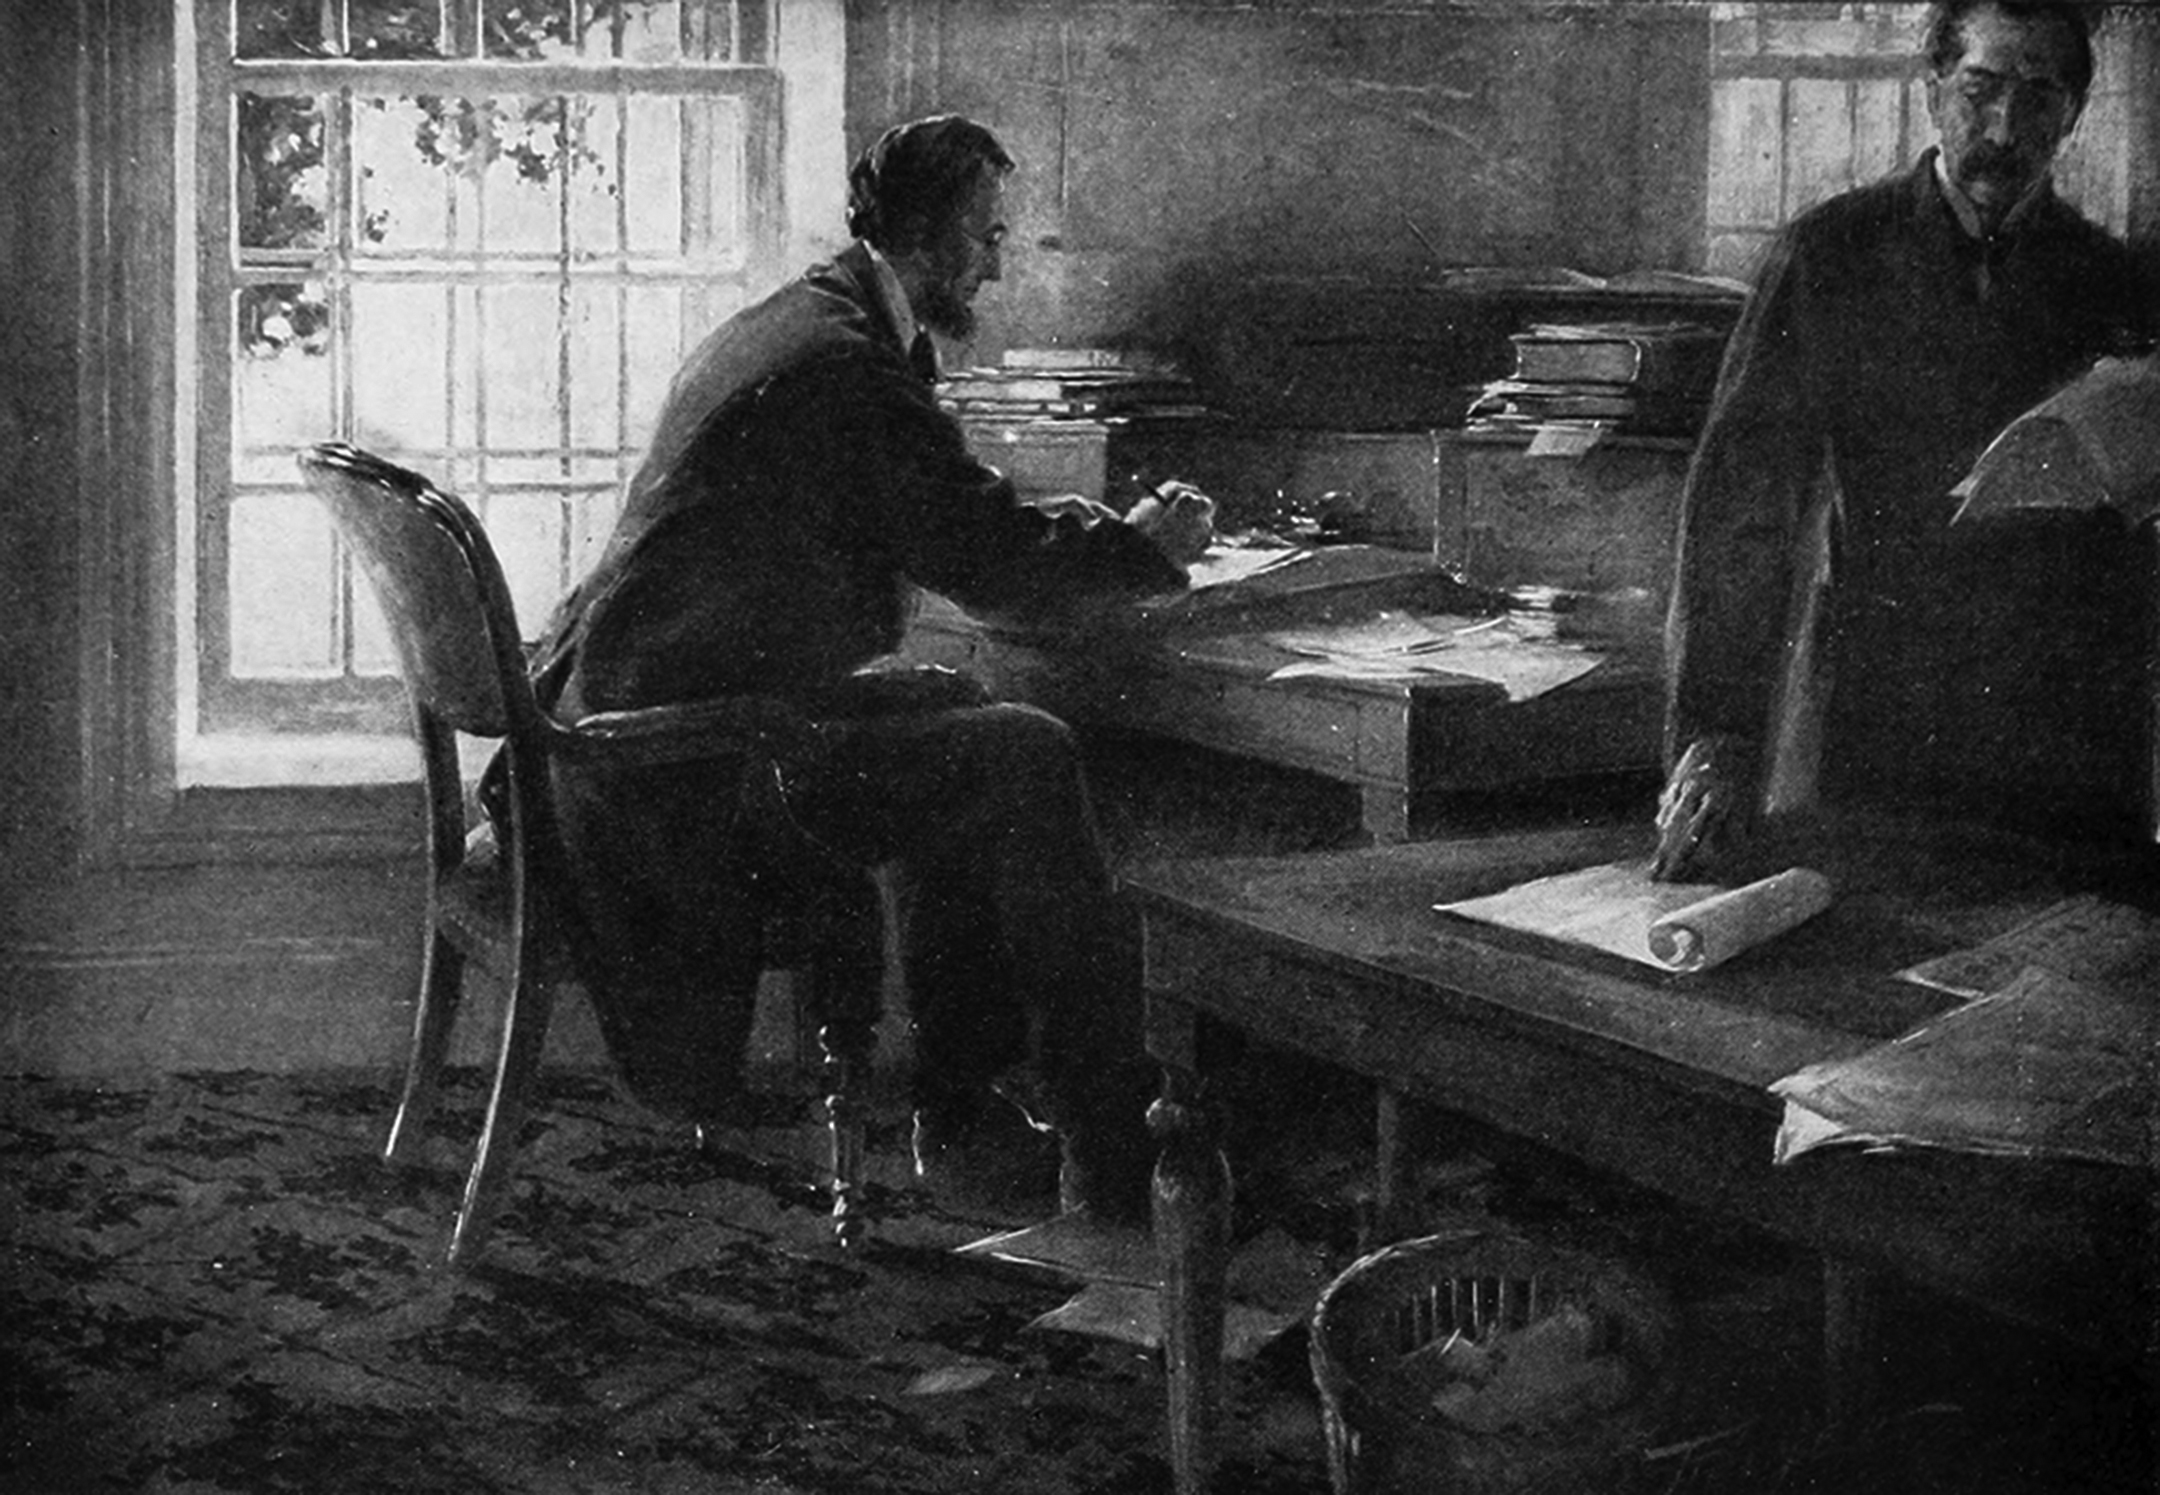 Black and white illustration of a seated man writing at a desk while another man stands at a nearby table